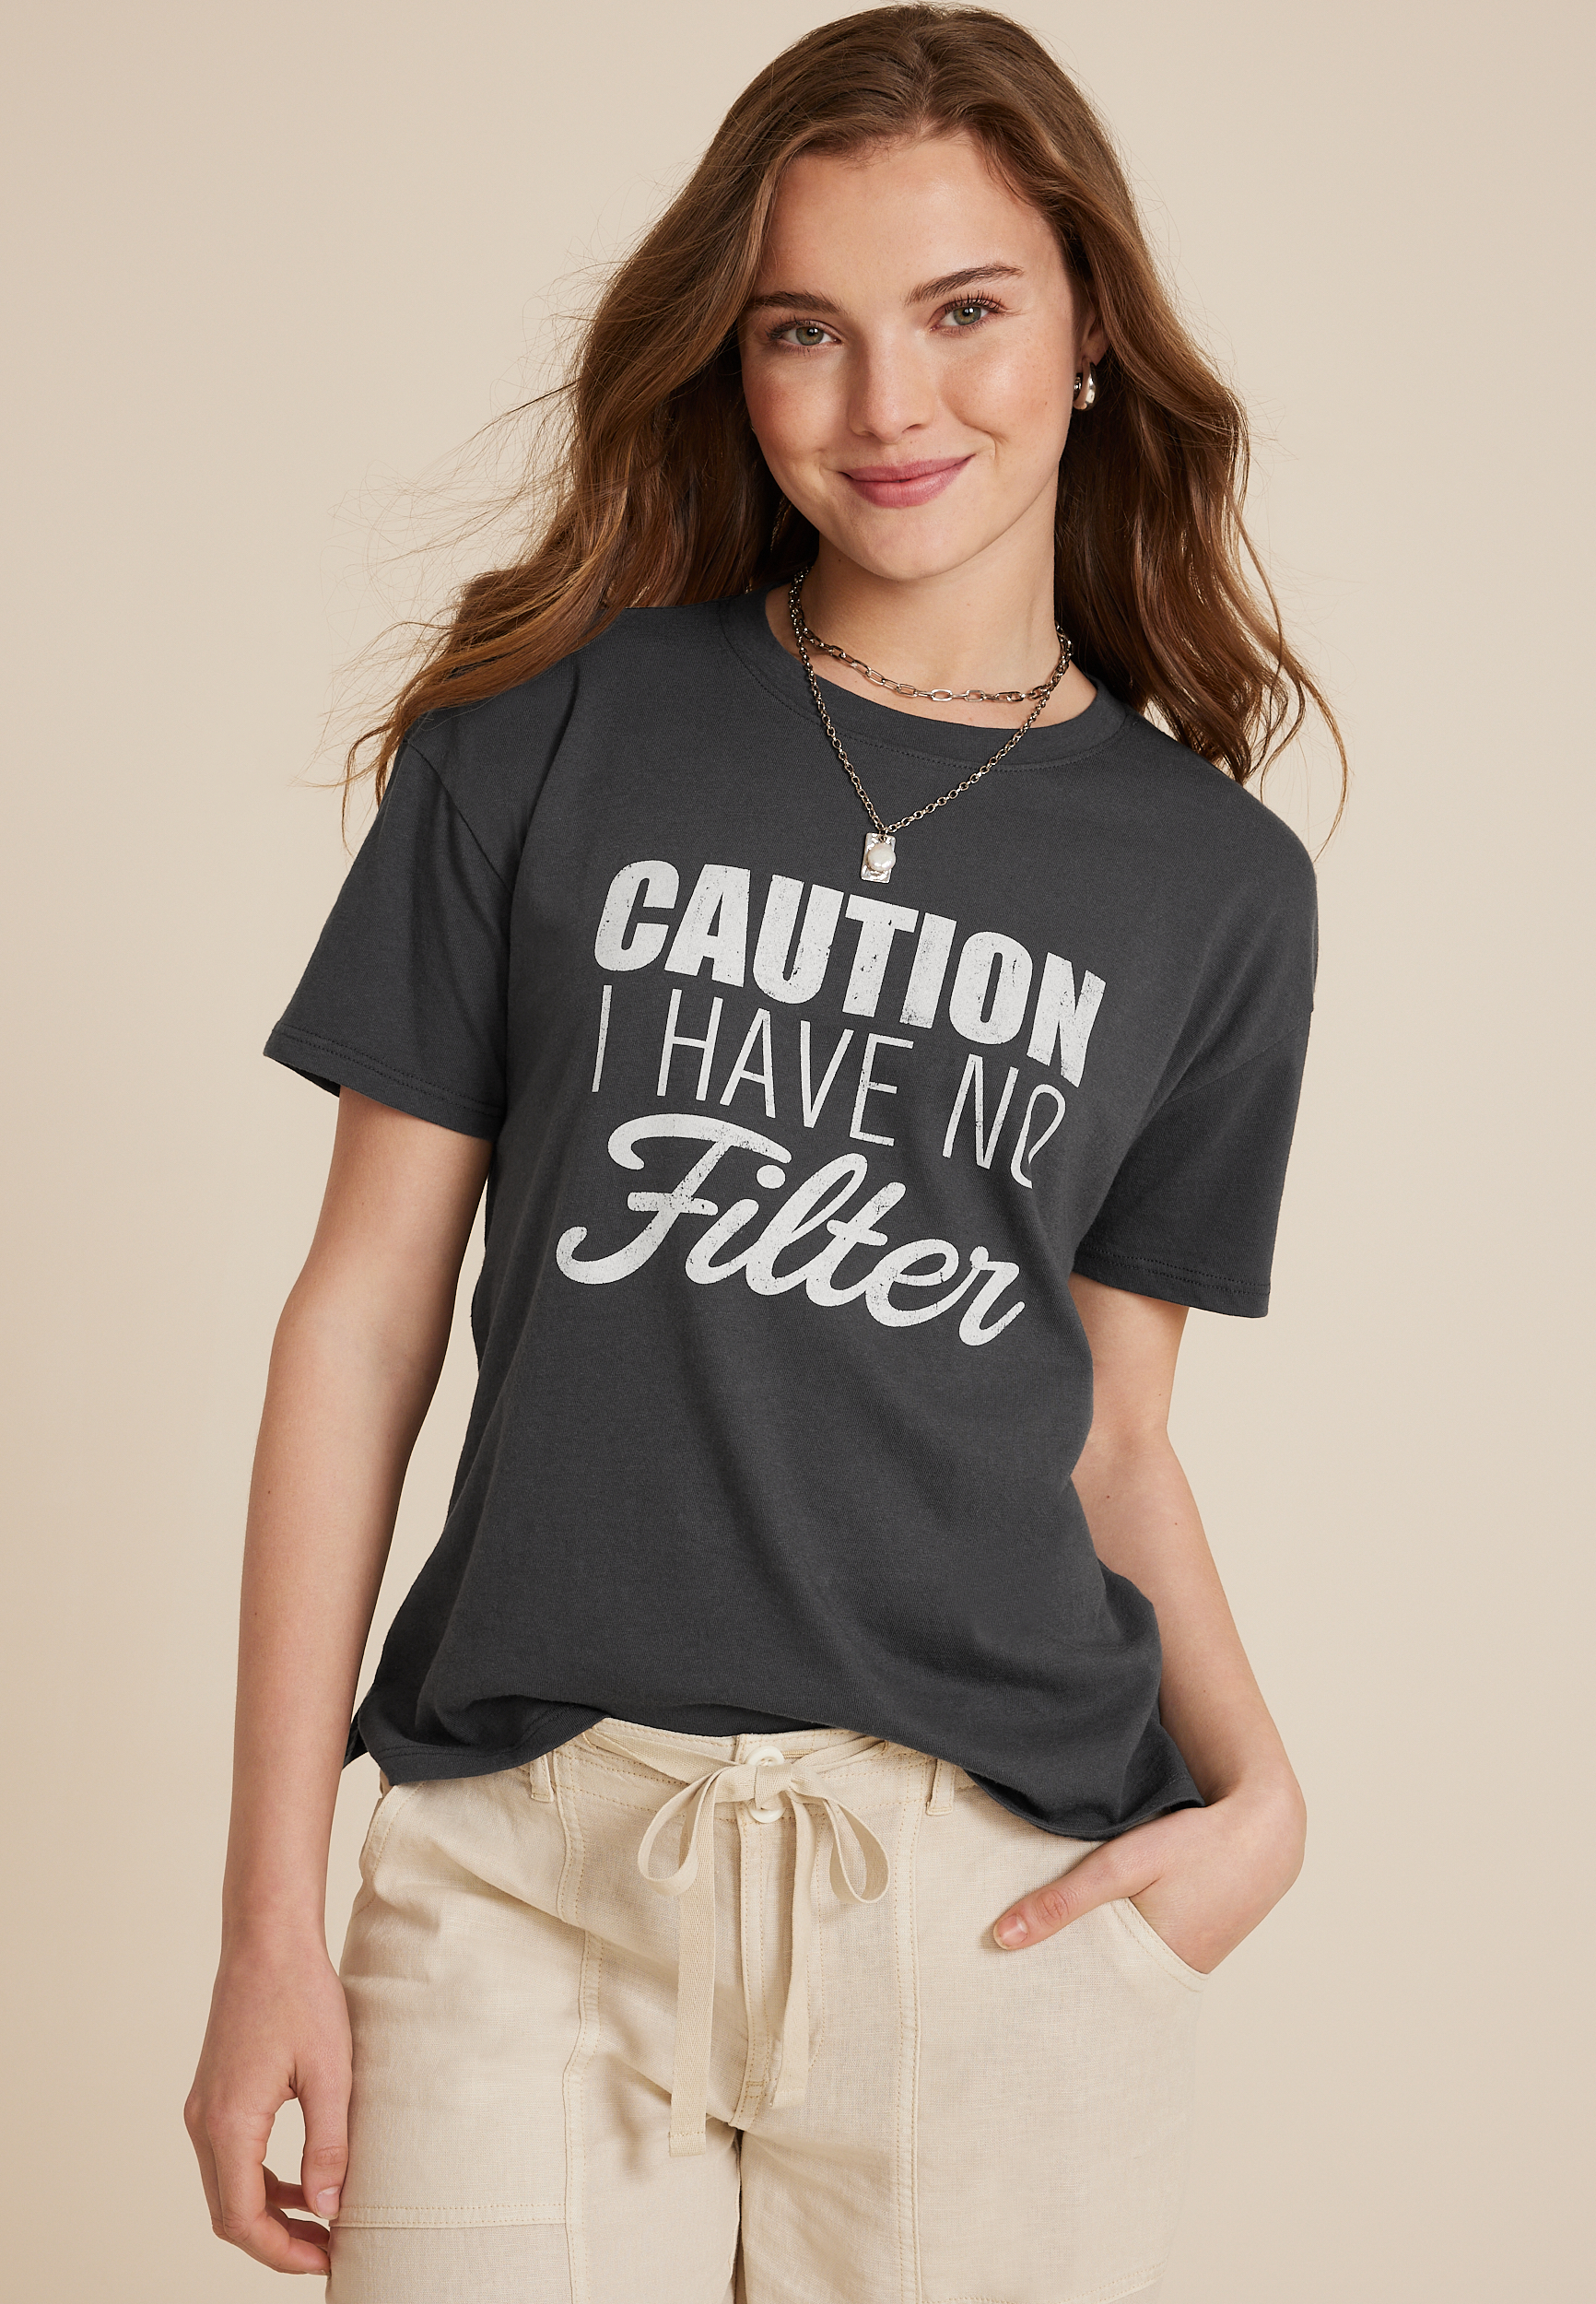 Caution I Have No Filter Oversized Fit Graphic Tee